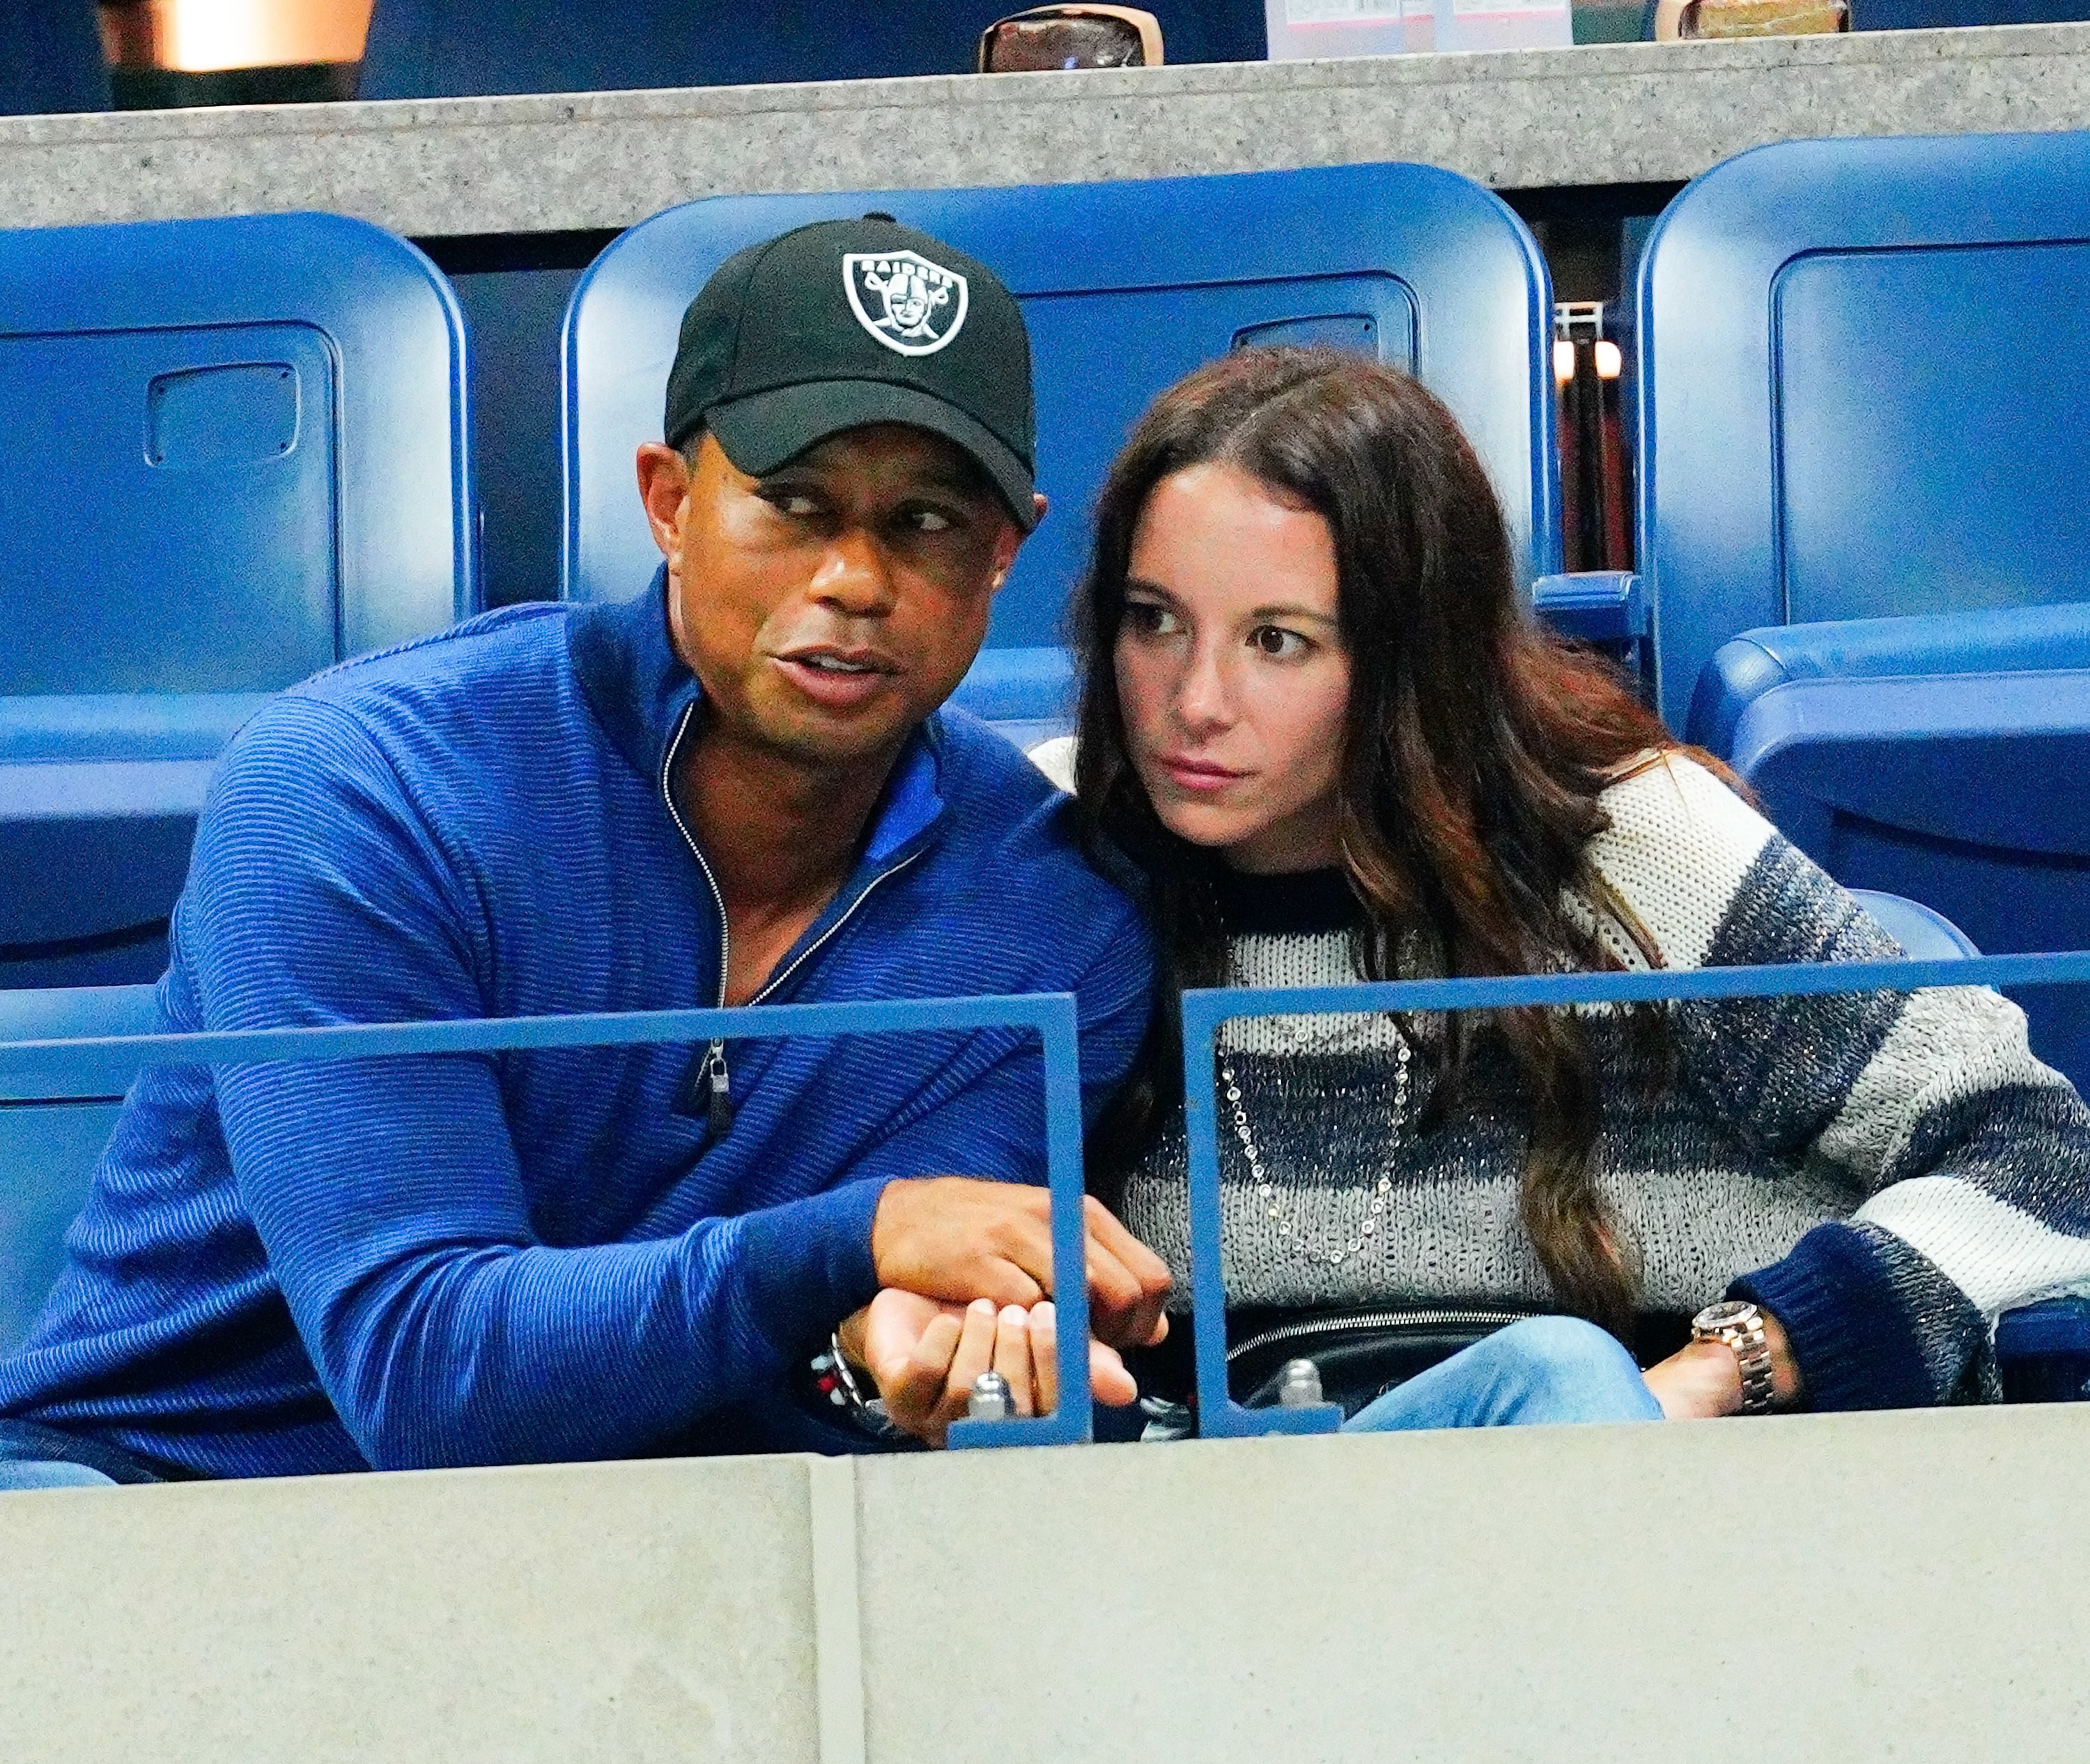 Tiger Woods and Erica Herman cheer on Rafael Nadal at 2019 US Open in New York City.